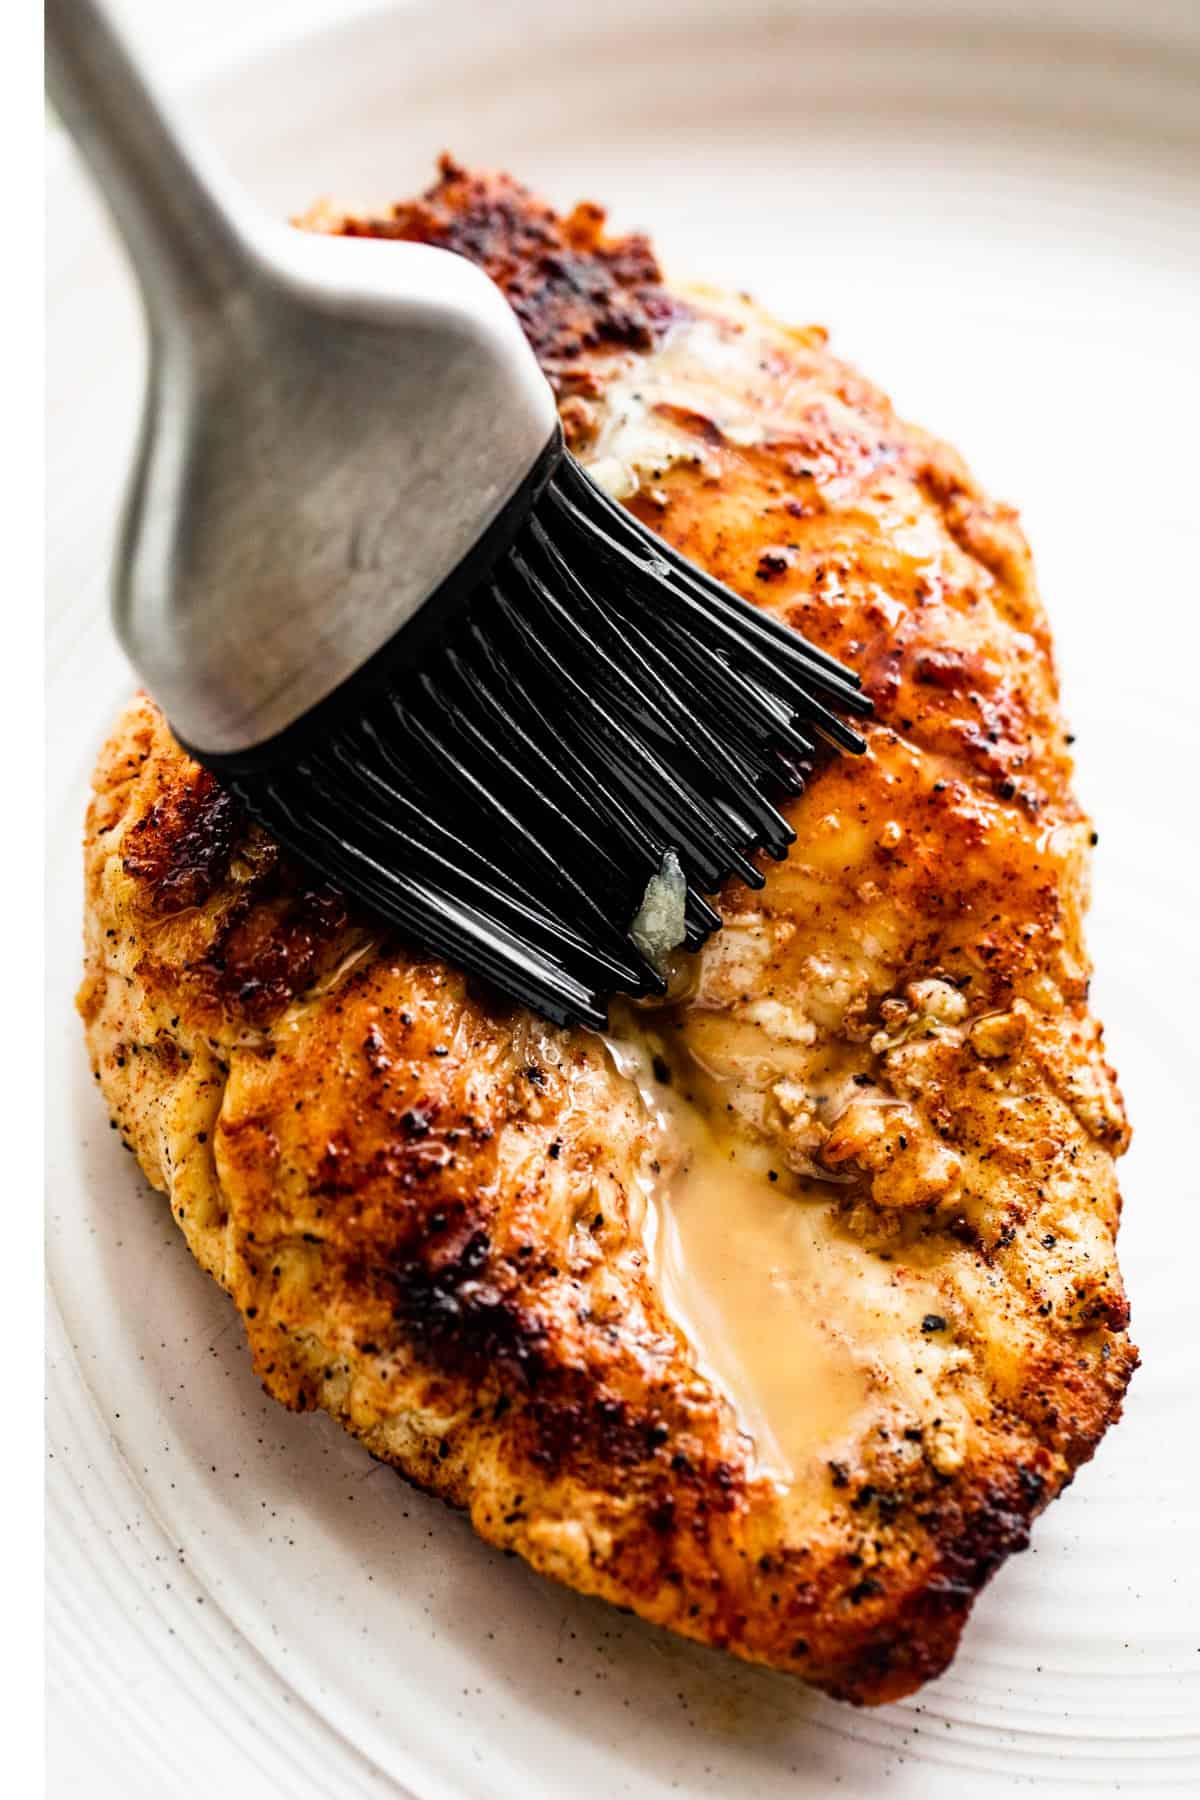 pastry brush brushing garlic butter over a grilled chicken breast.